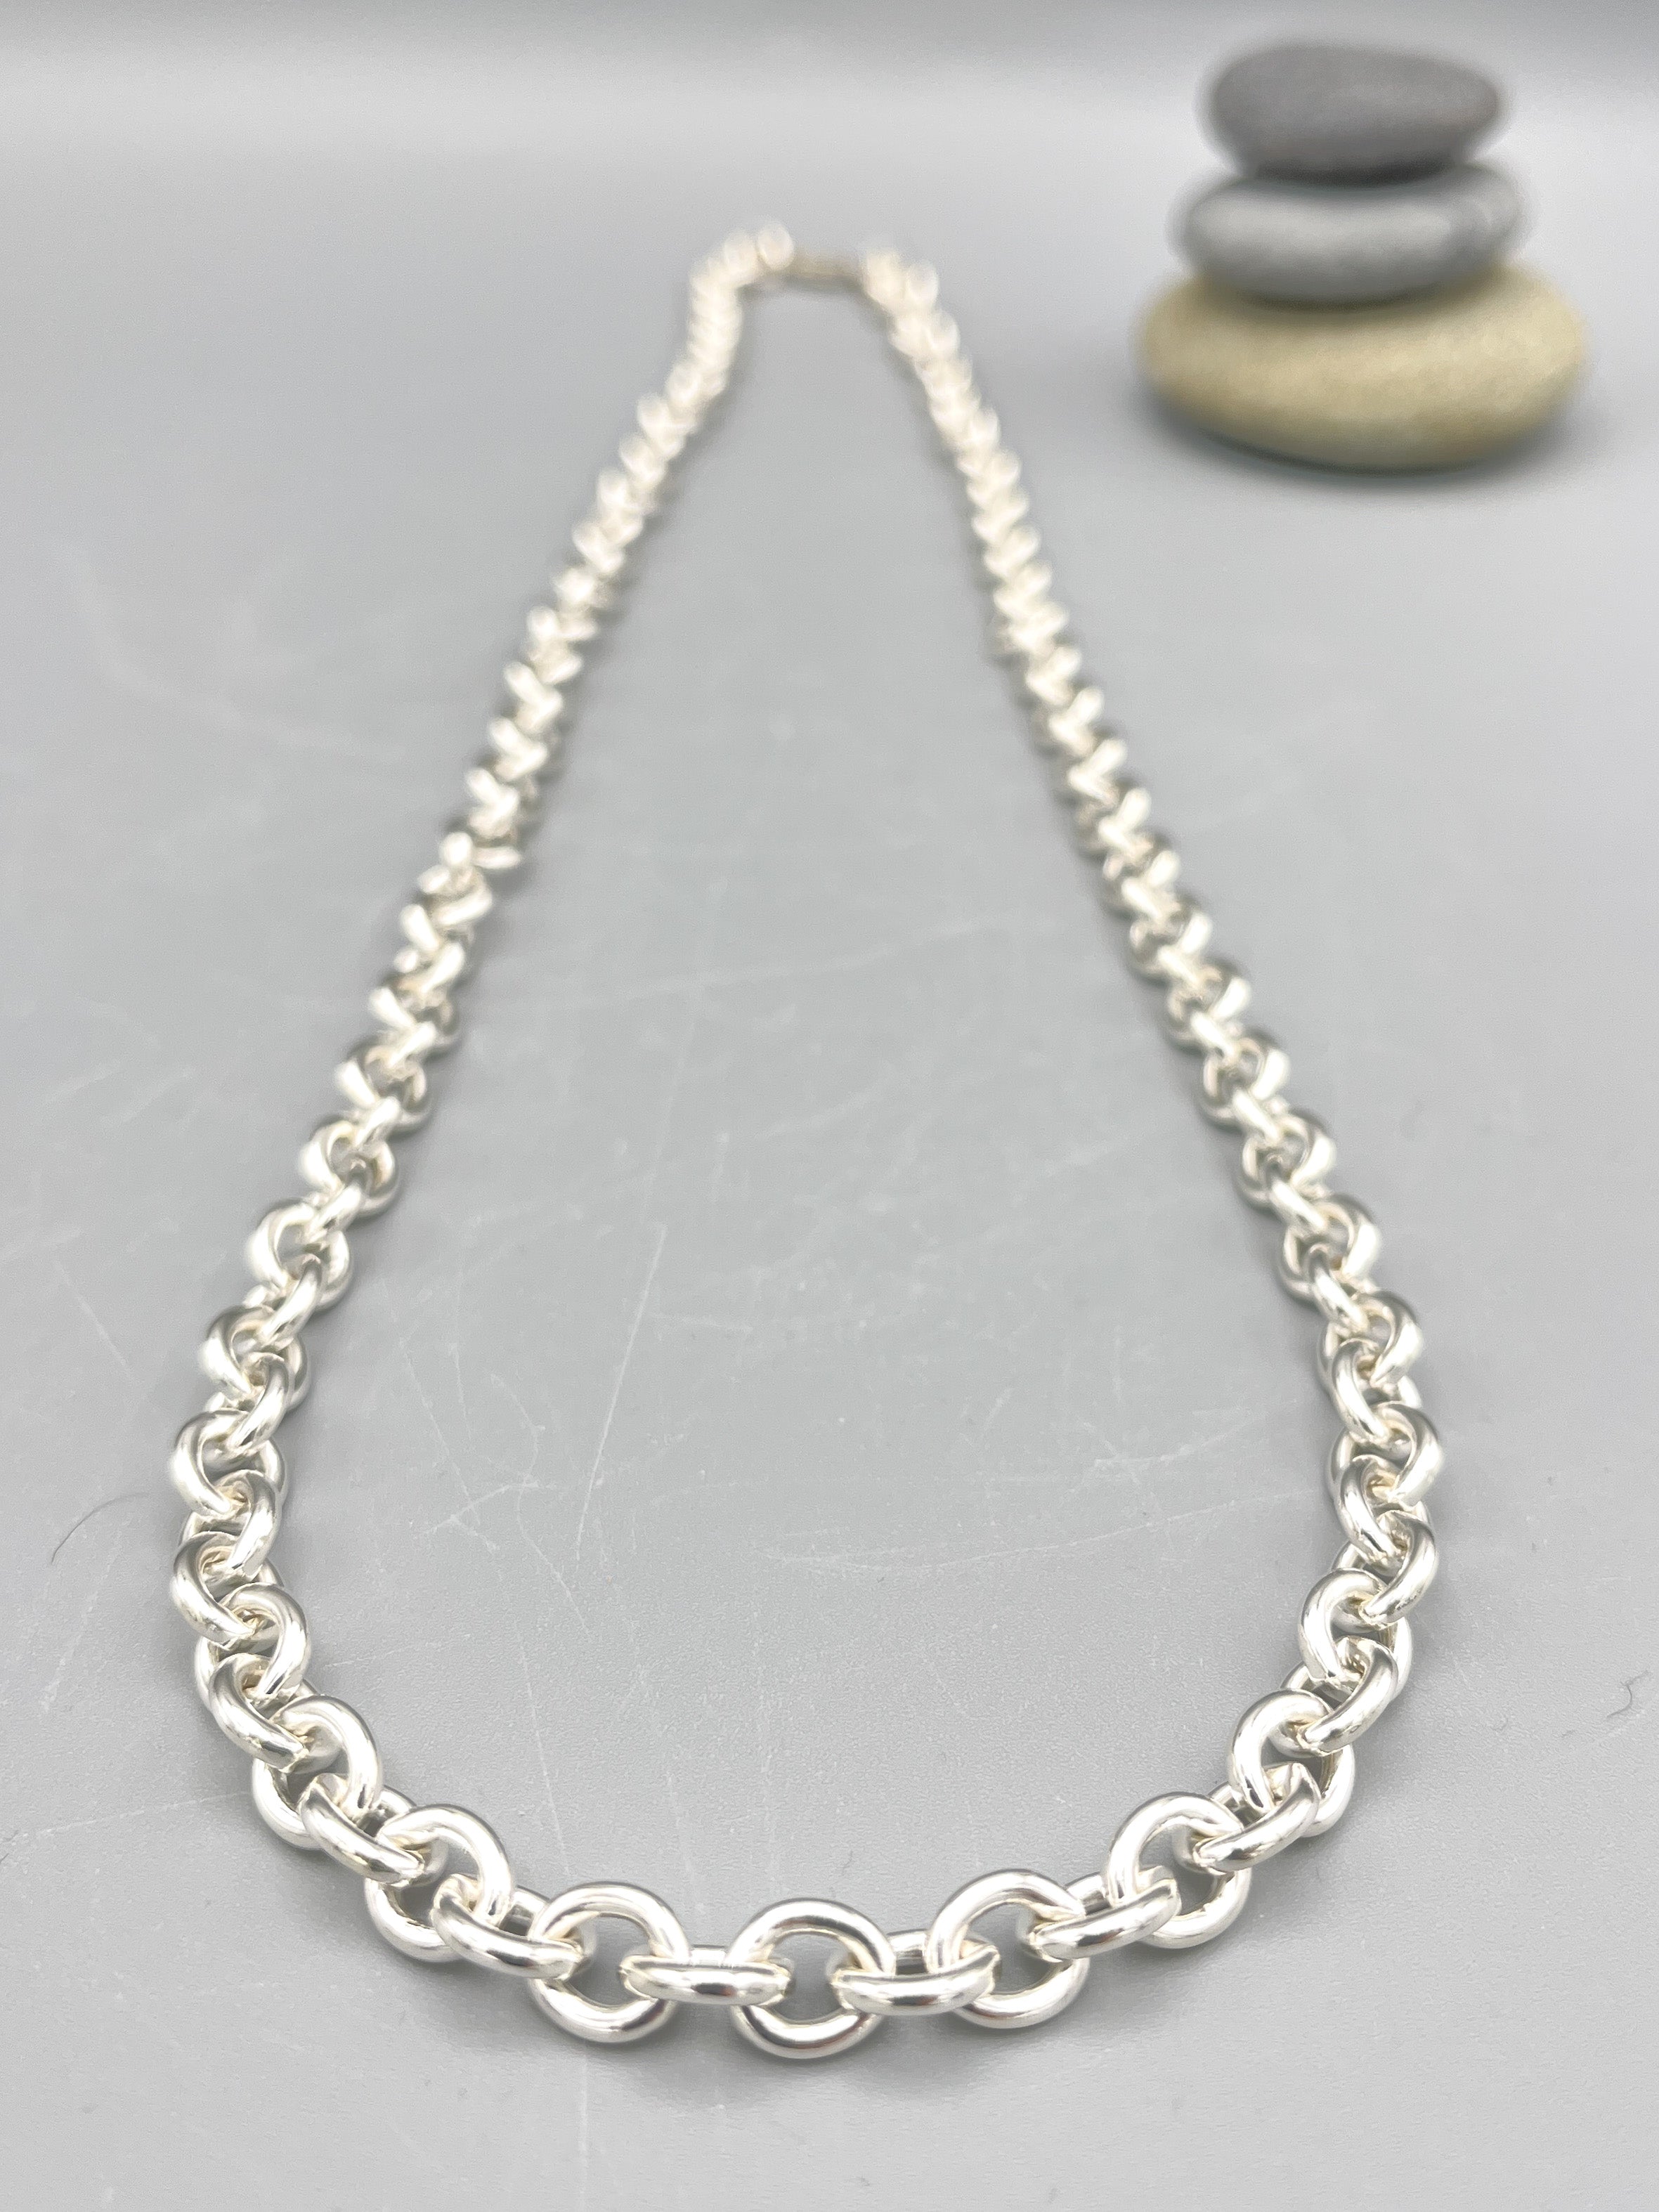 Sterling Silver Necklace. 24 ½” Italian heavy cable link with lobster claw clasp